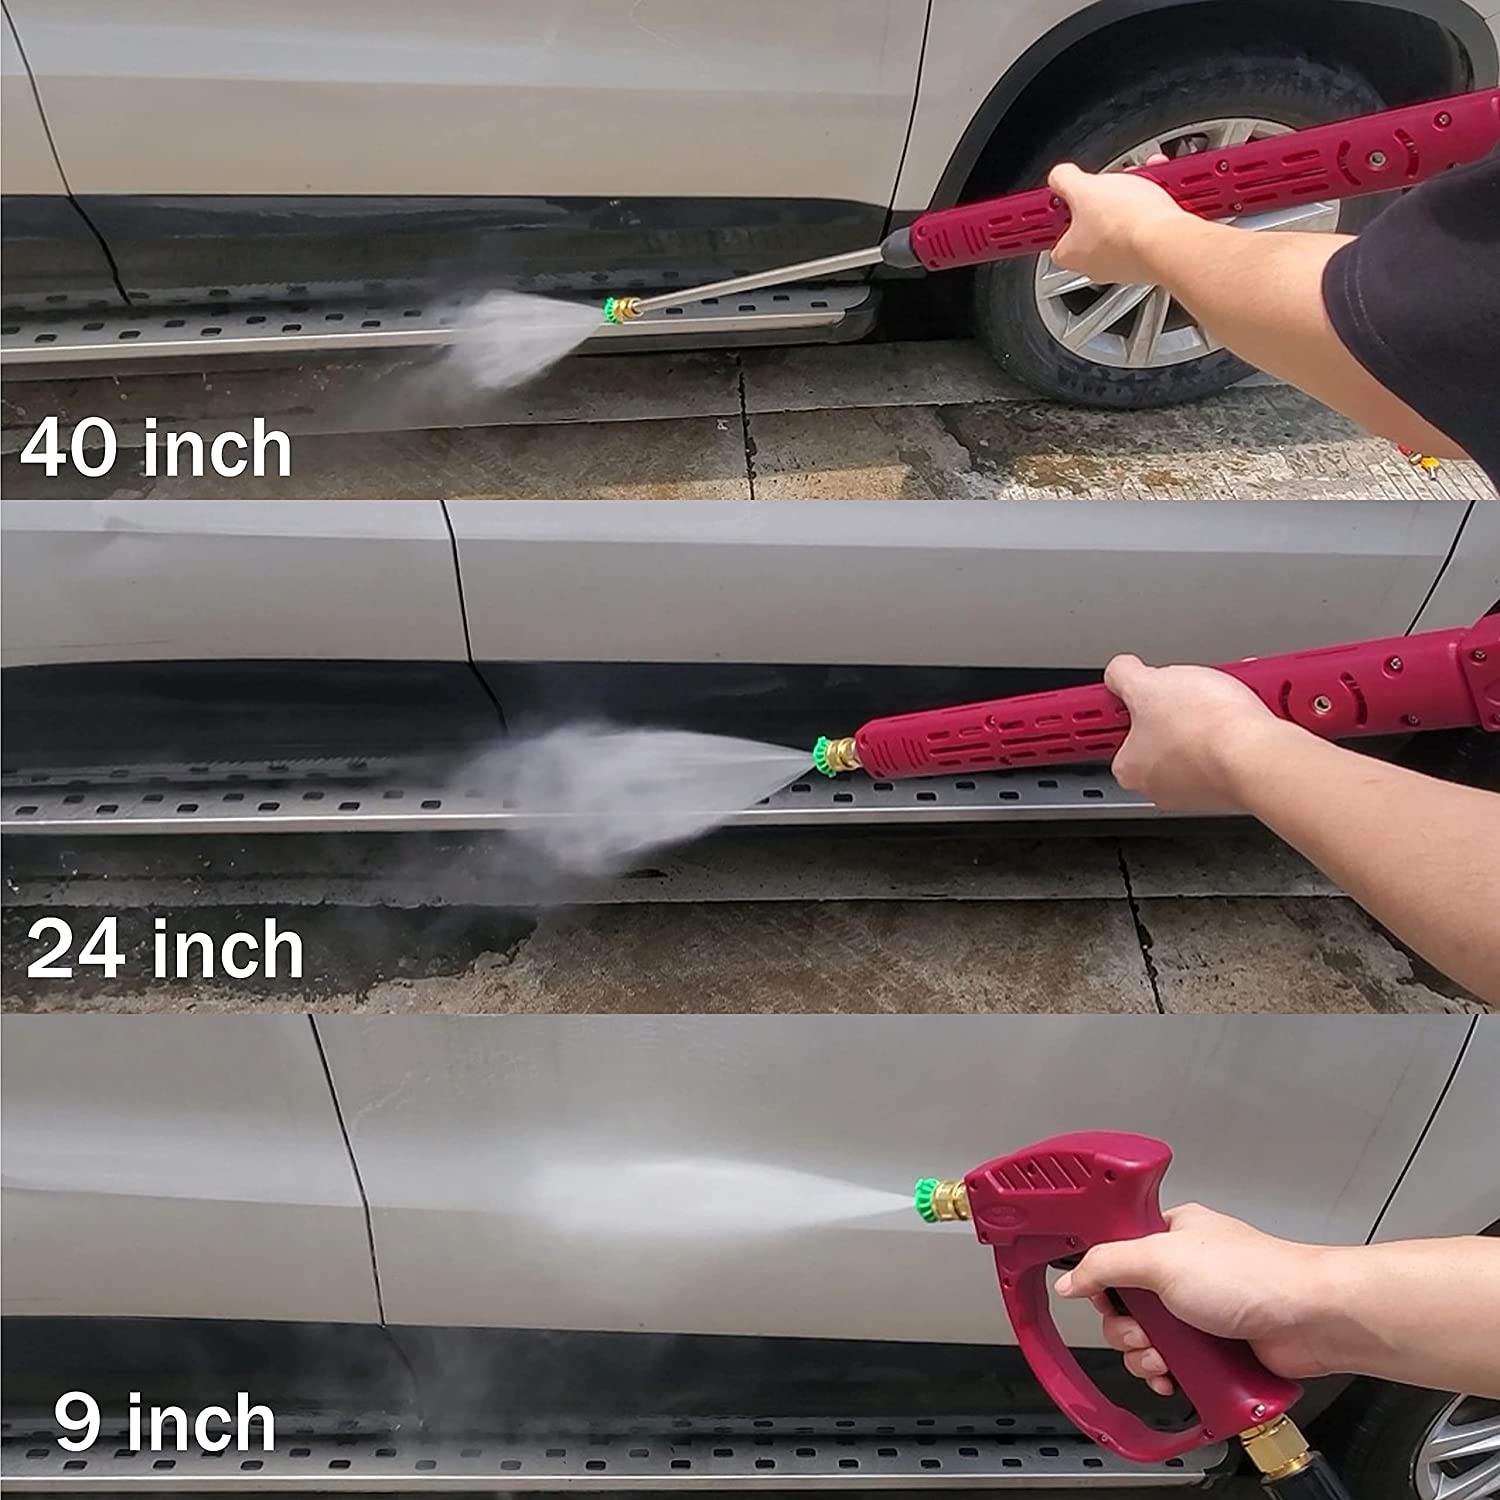 Pressure Washer Gun with Replacement Extension Wand, 5000 PSI, Power Washer Gun for Hot and Cold Water